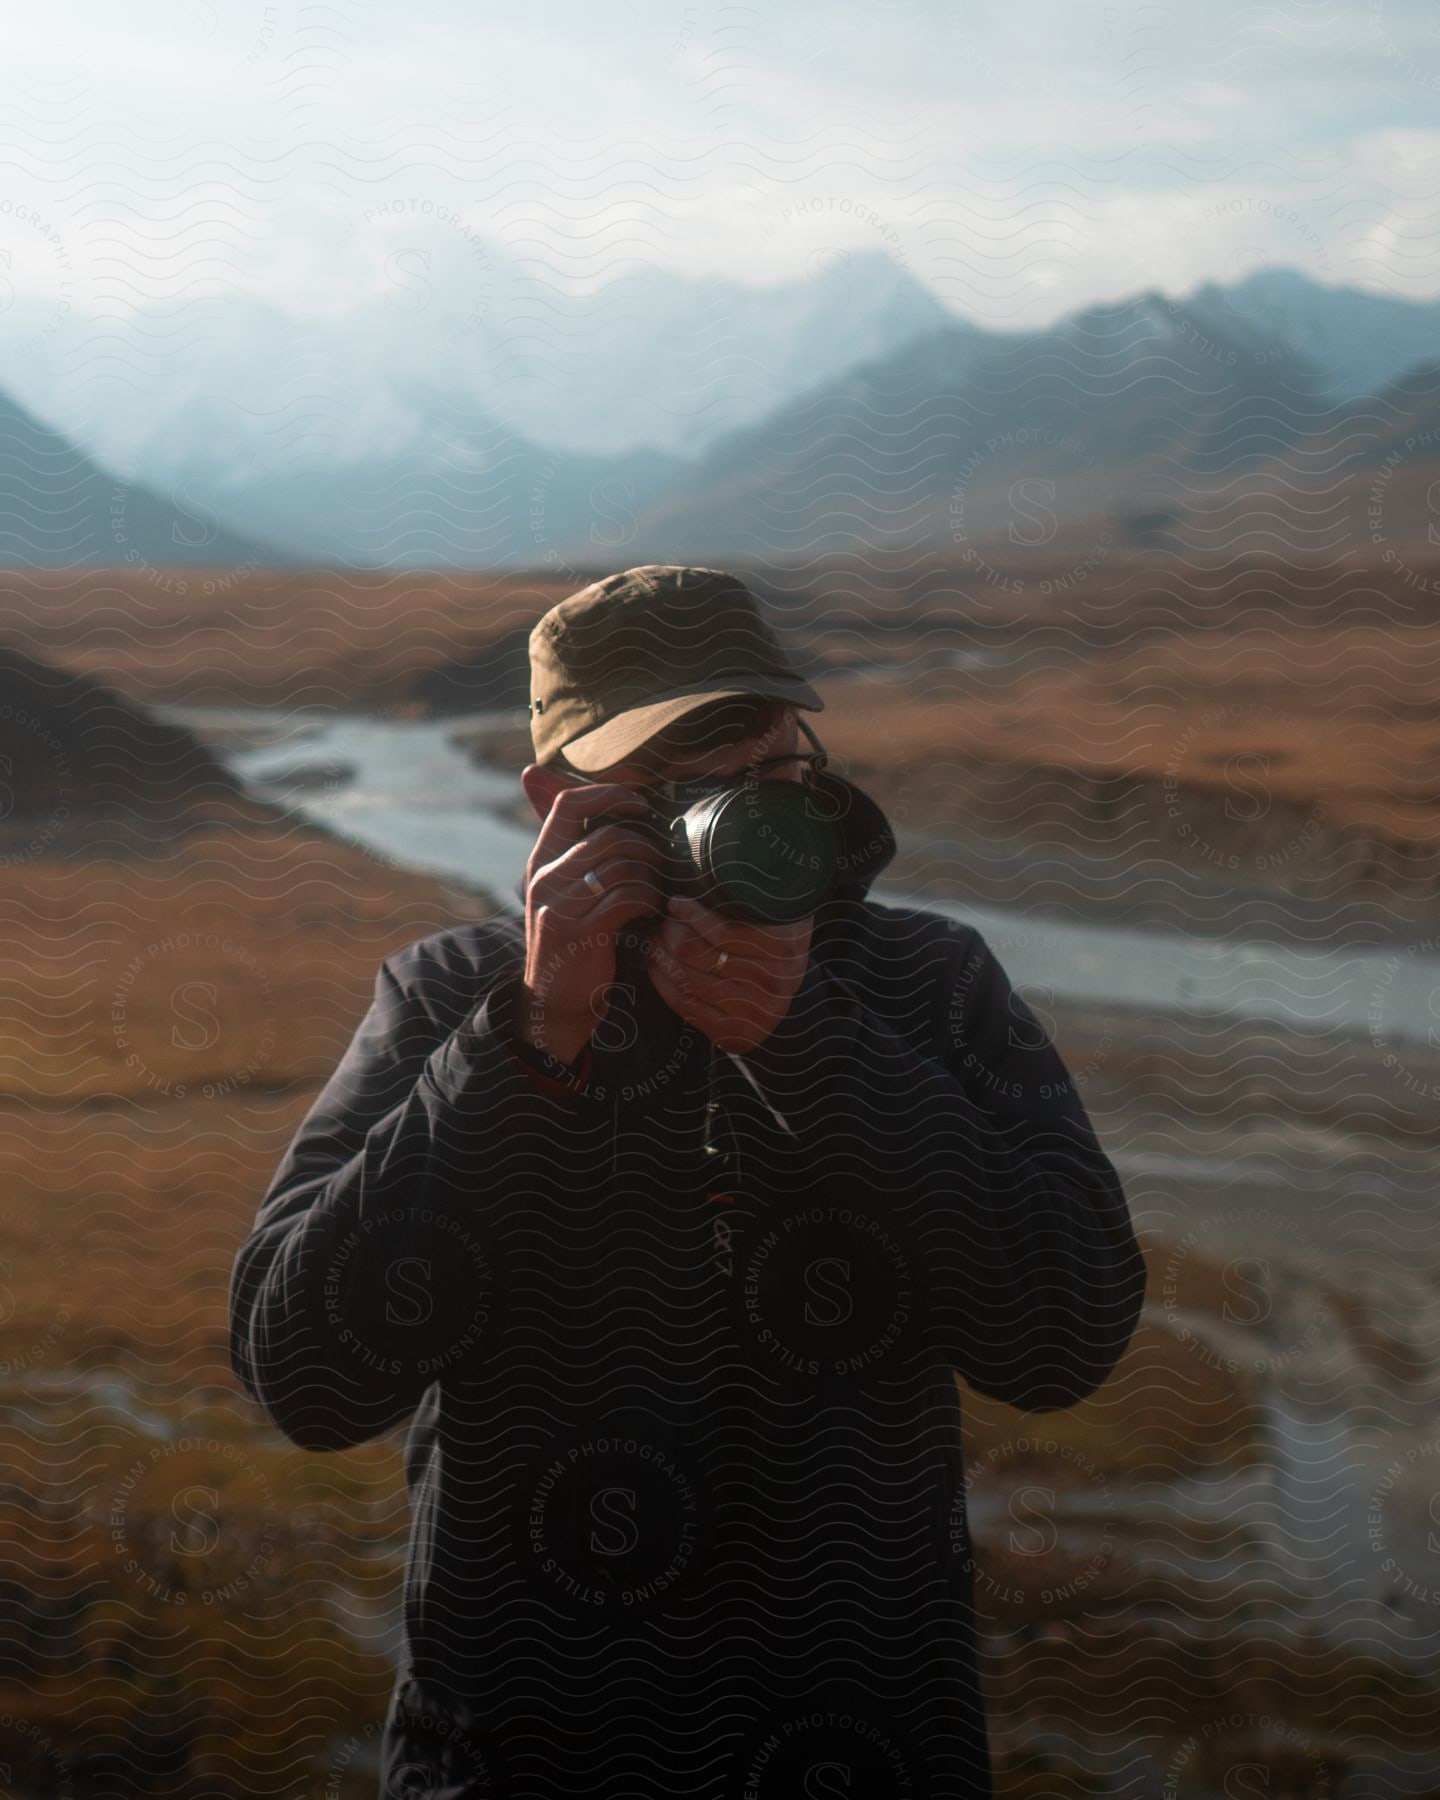 A person holding a camera taking photos while standing in front of a river and mountains.